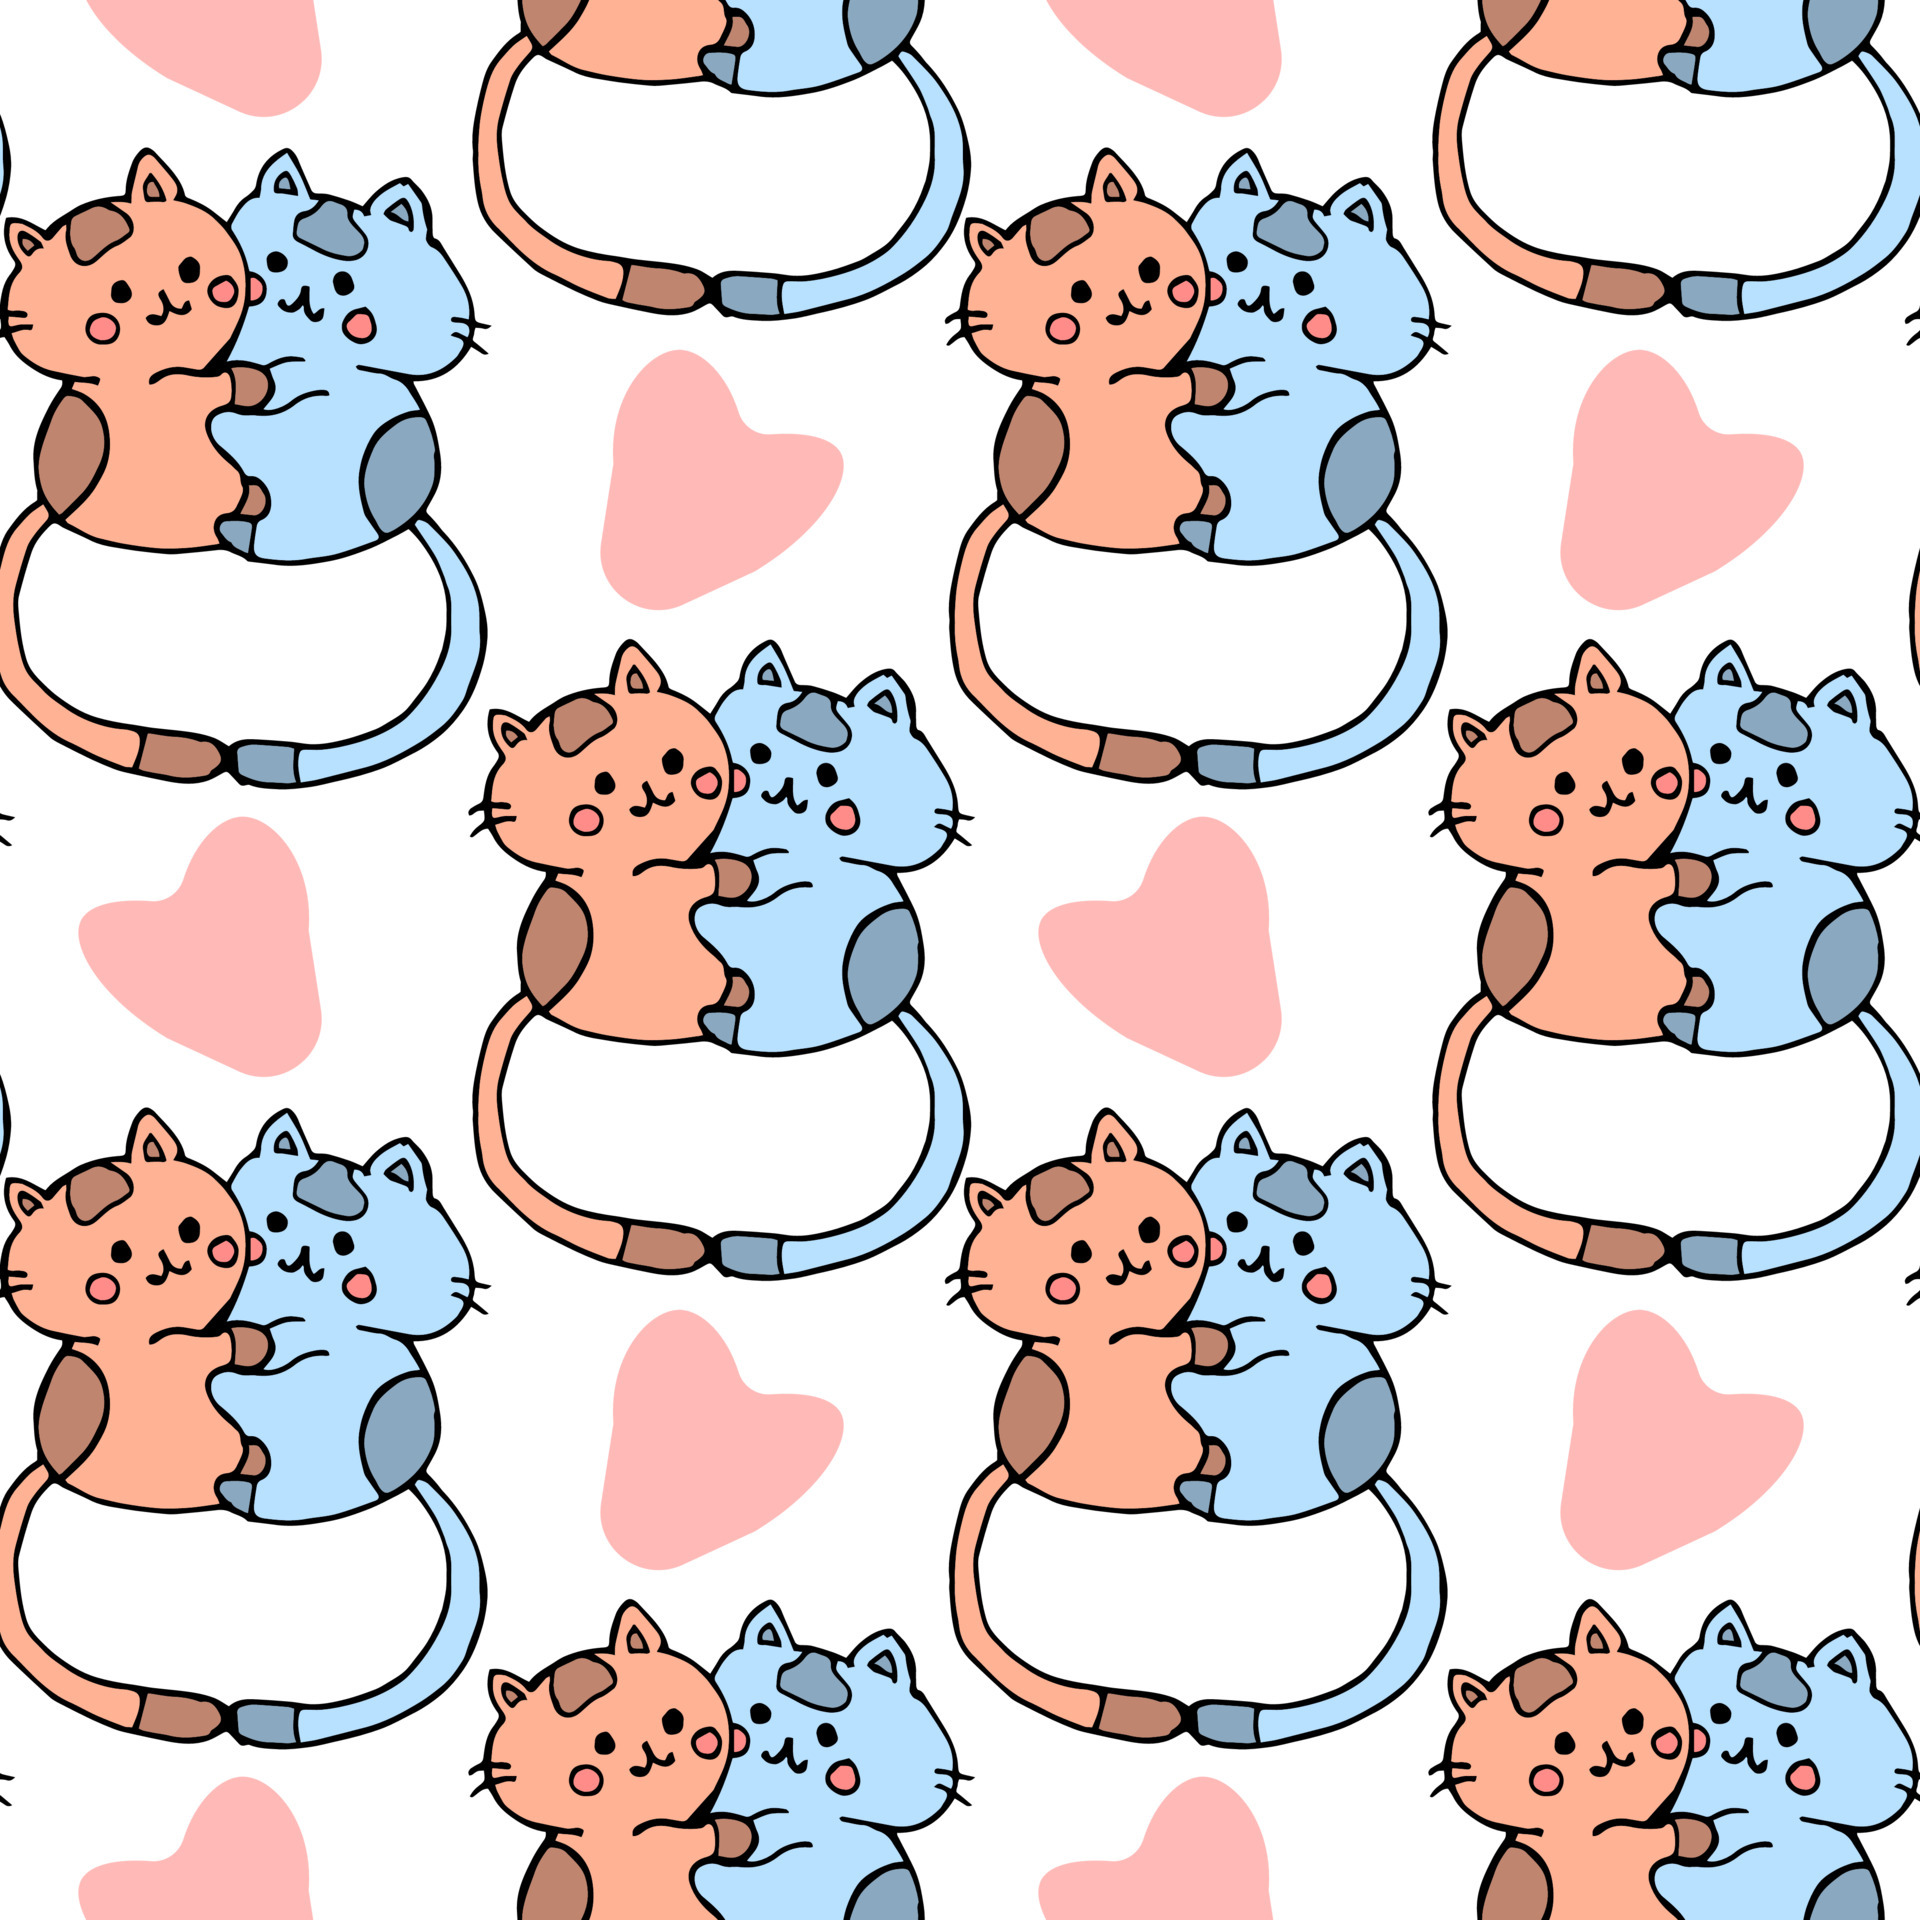 Seamless Pattern, Hand Drawn Cute Kittens Hugging Each Other. Design For Birthday And St. Valentines Day Cards, Textiles, Wallpaper